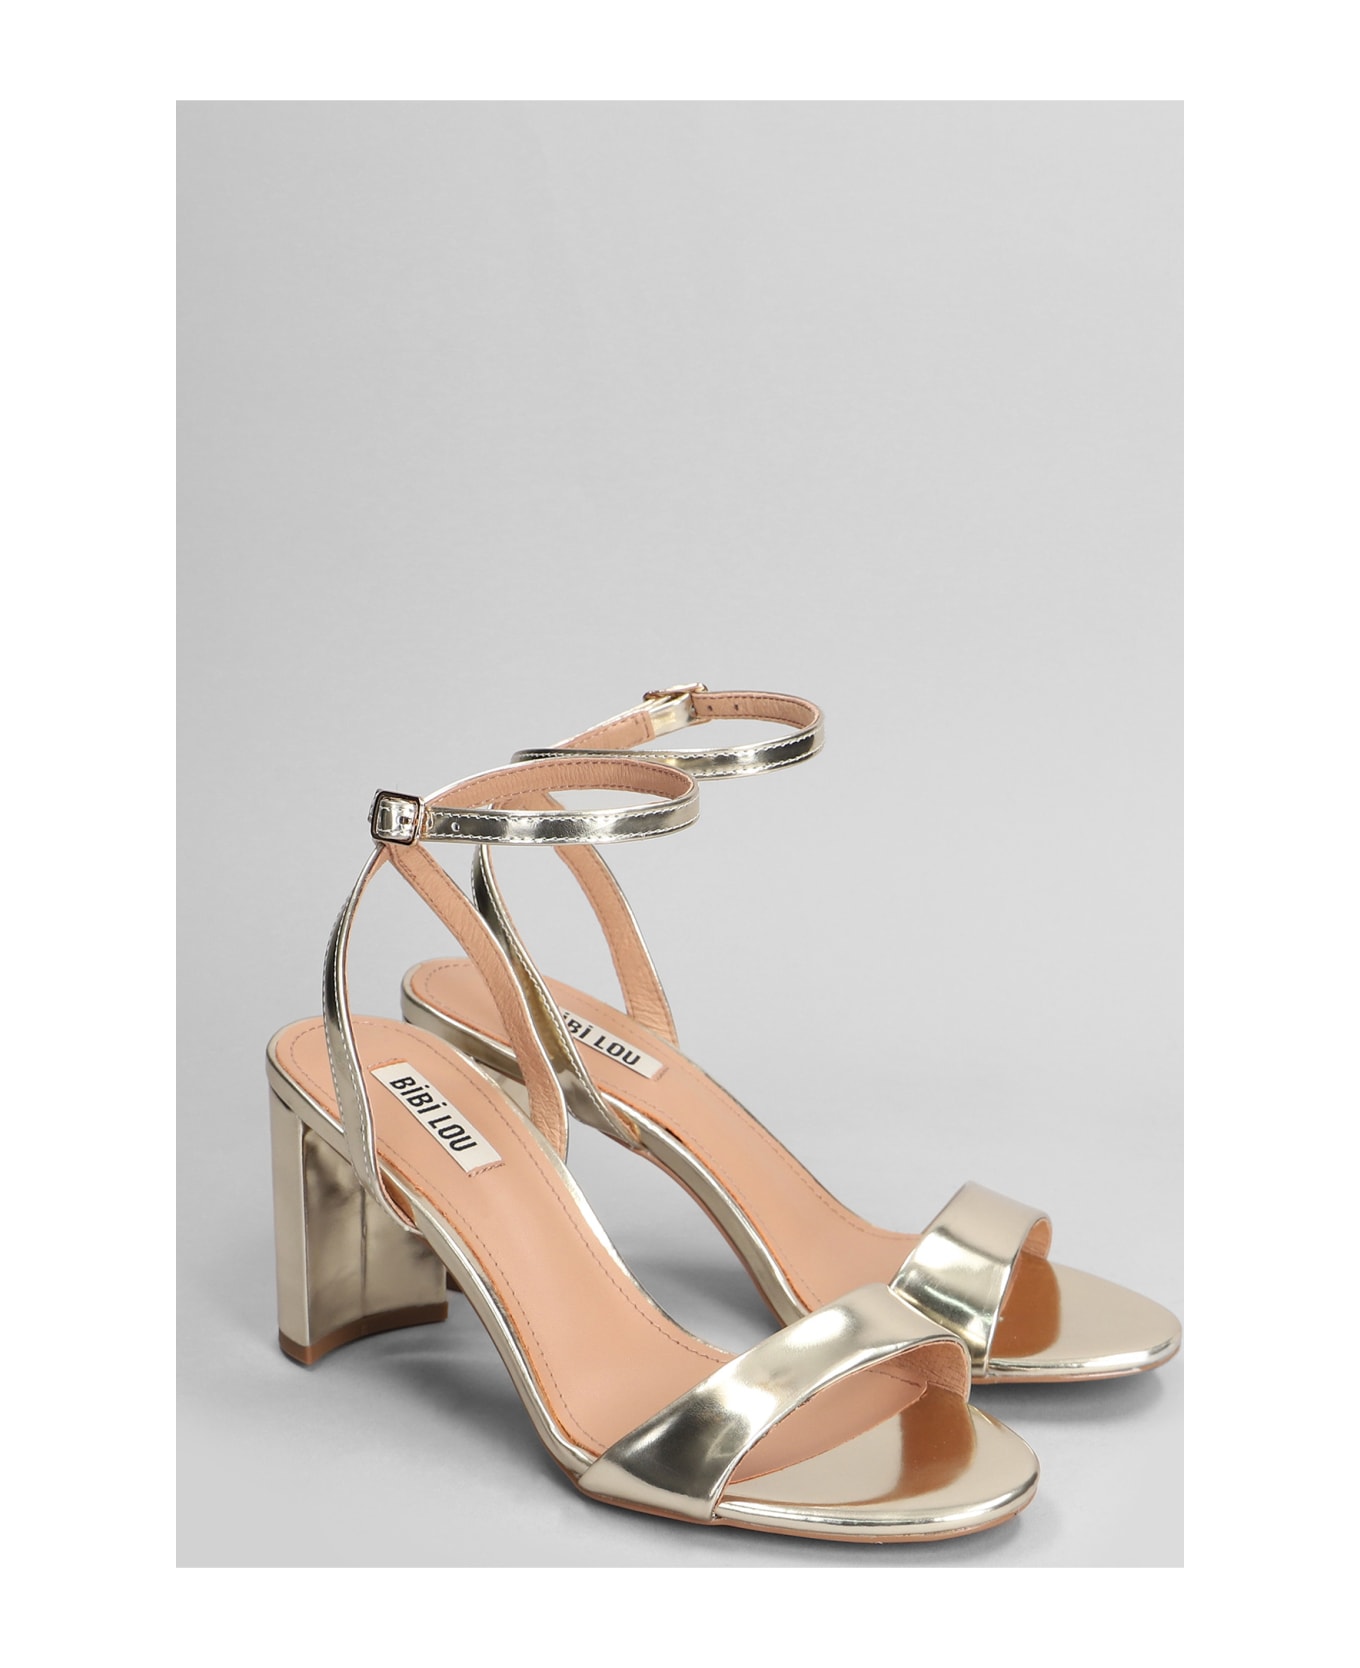 Bibi Lou Aster Sandals In Gold Leather - gold サンダル